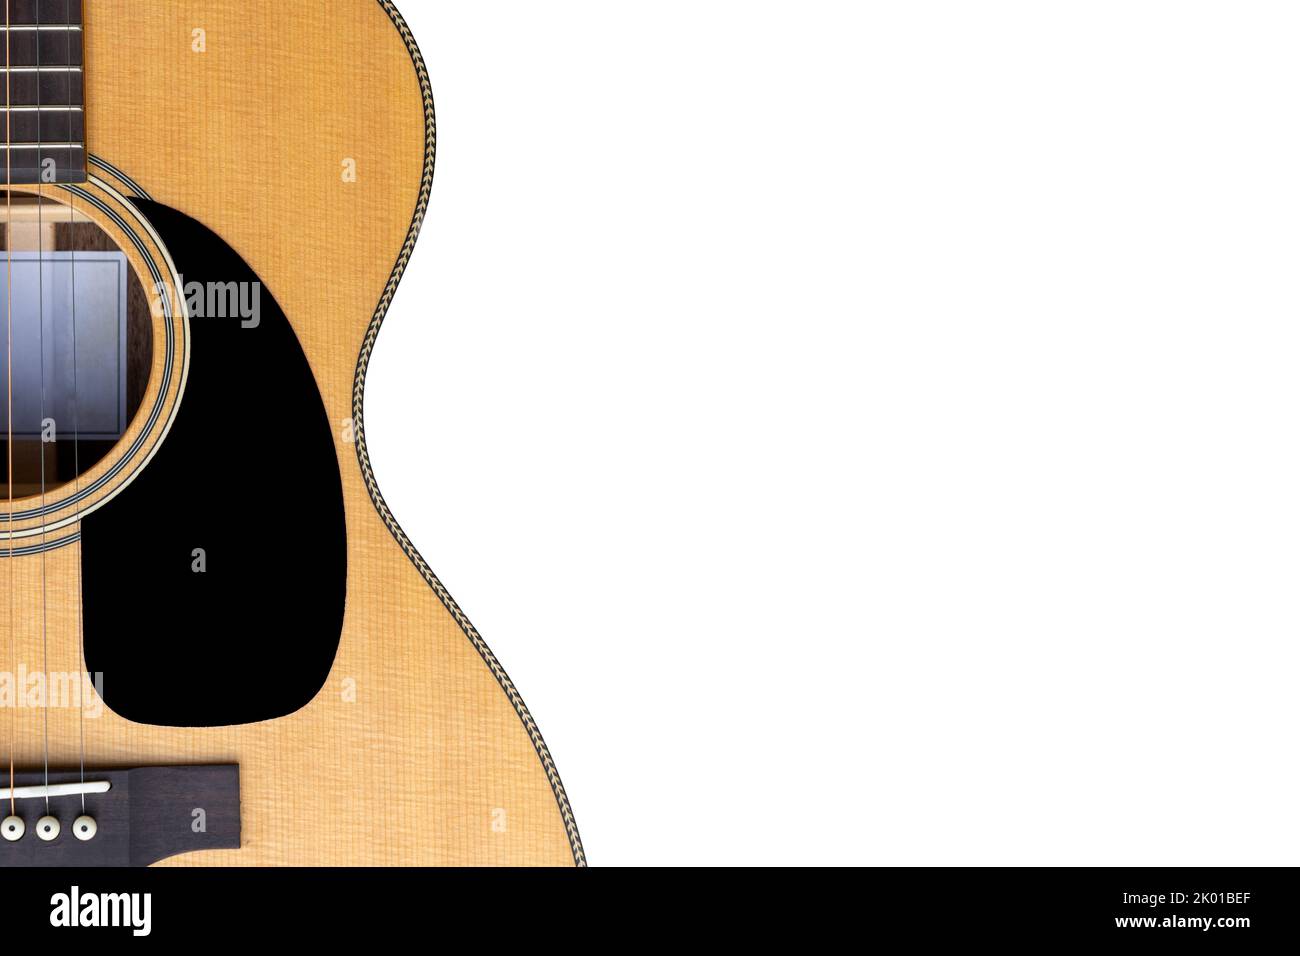 wooden acoustic guitar with black finger plate Stock Photo